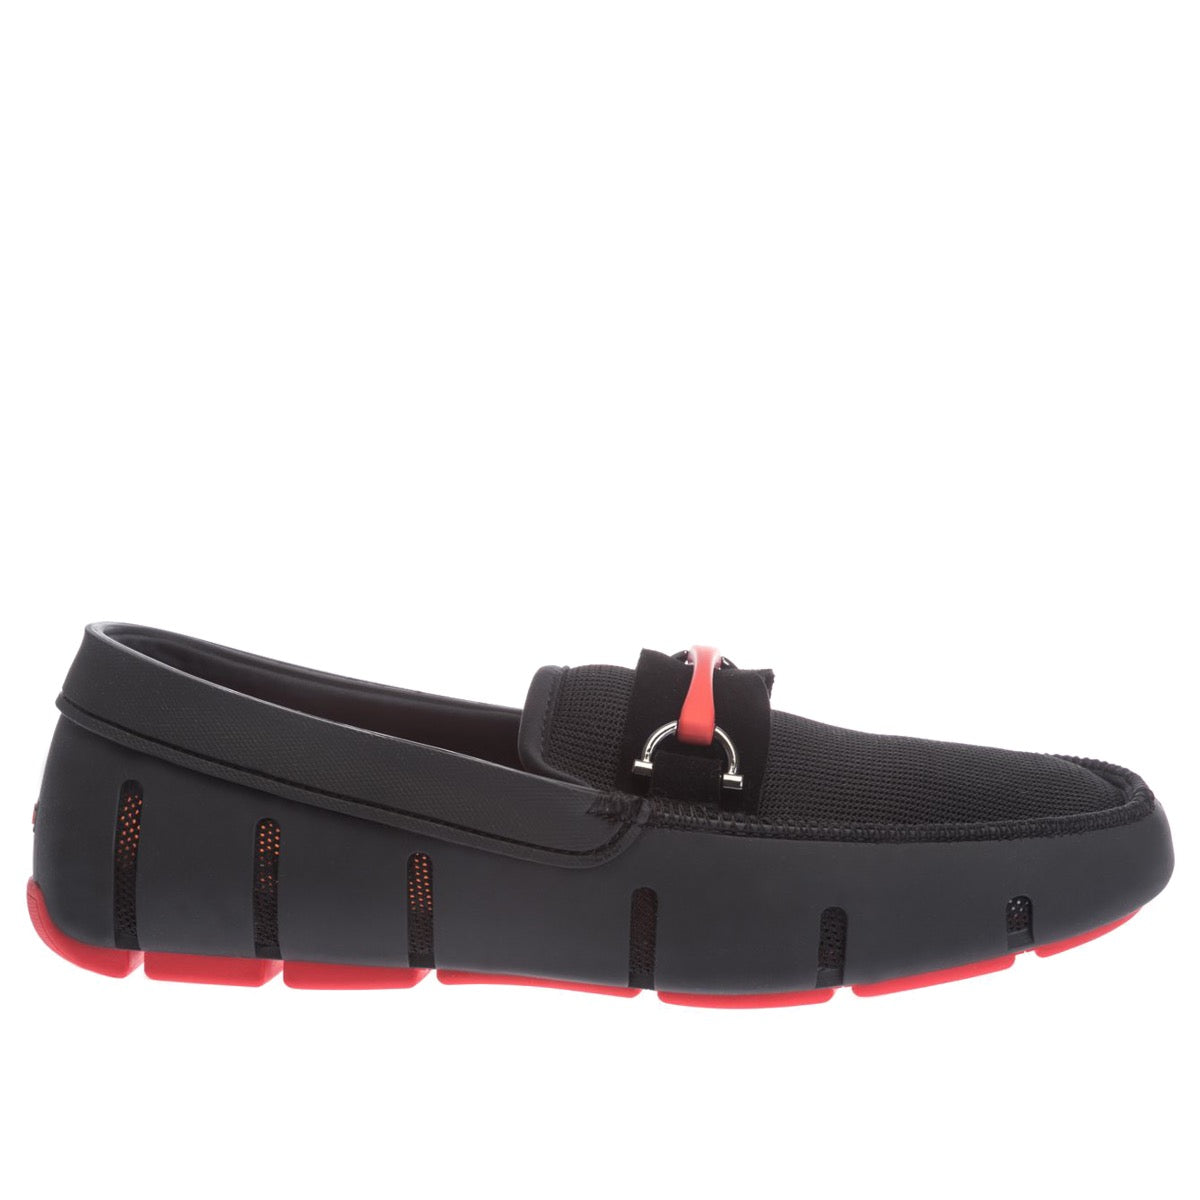 Swims The Sporty Bit Loafer Shoe in Black Main